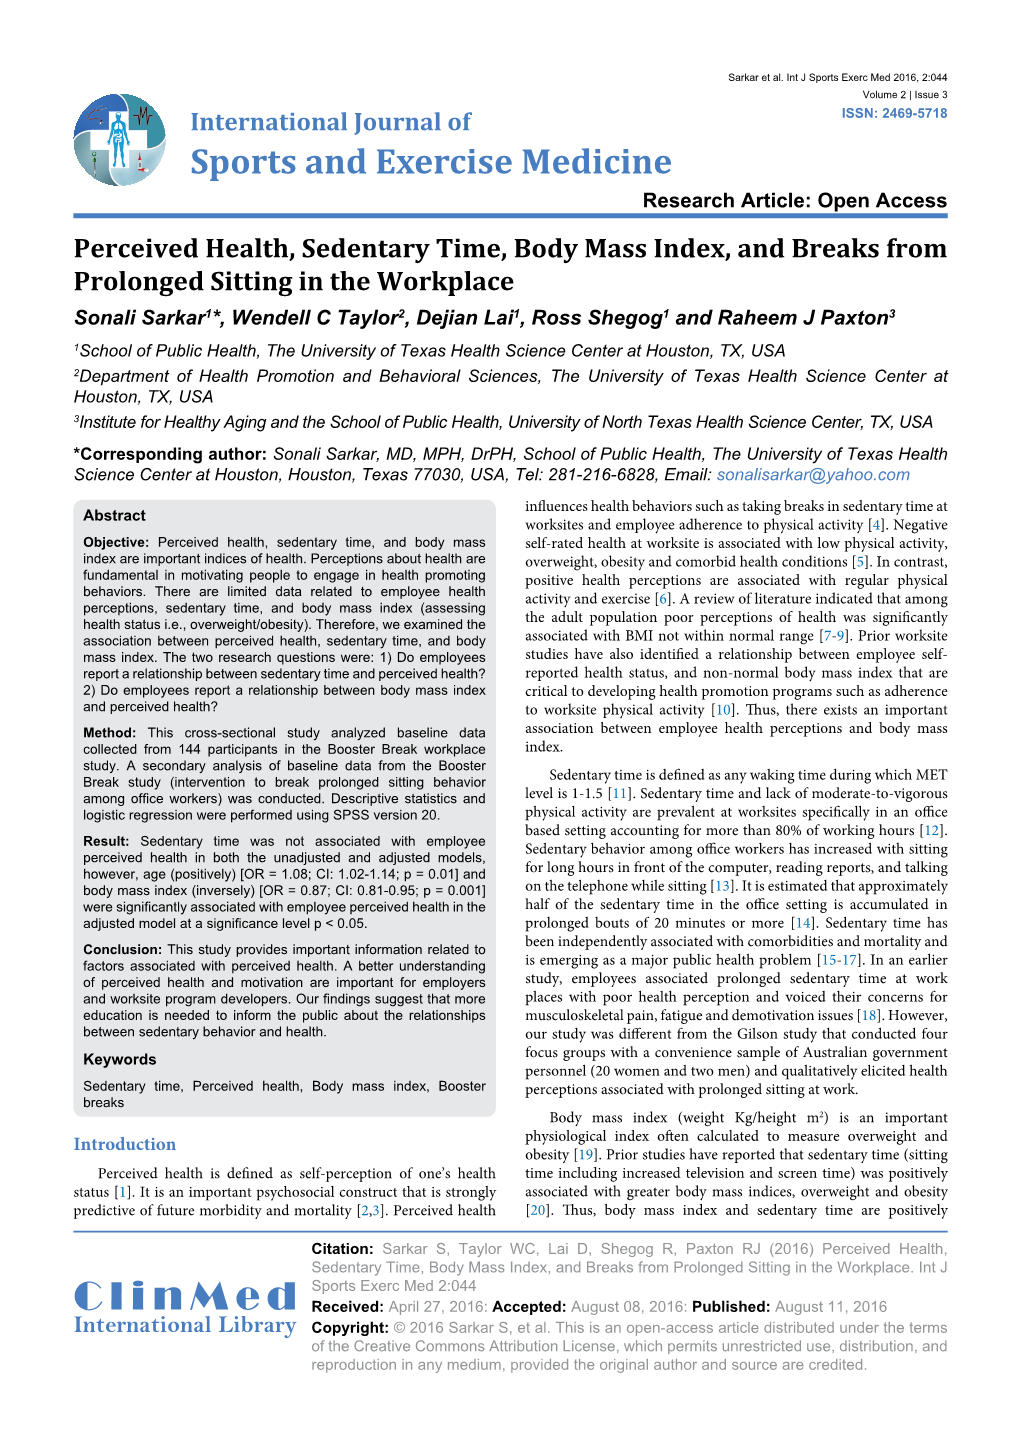 Perceived Health, Sedentary Time, Body Mass Index, and Breaks from Prolonged Sitting in the Workplace